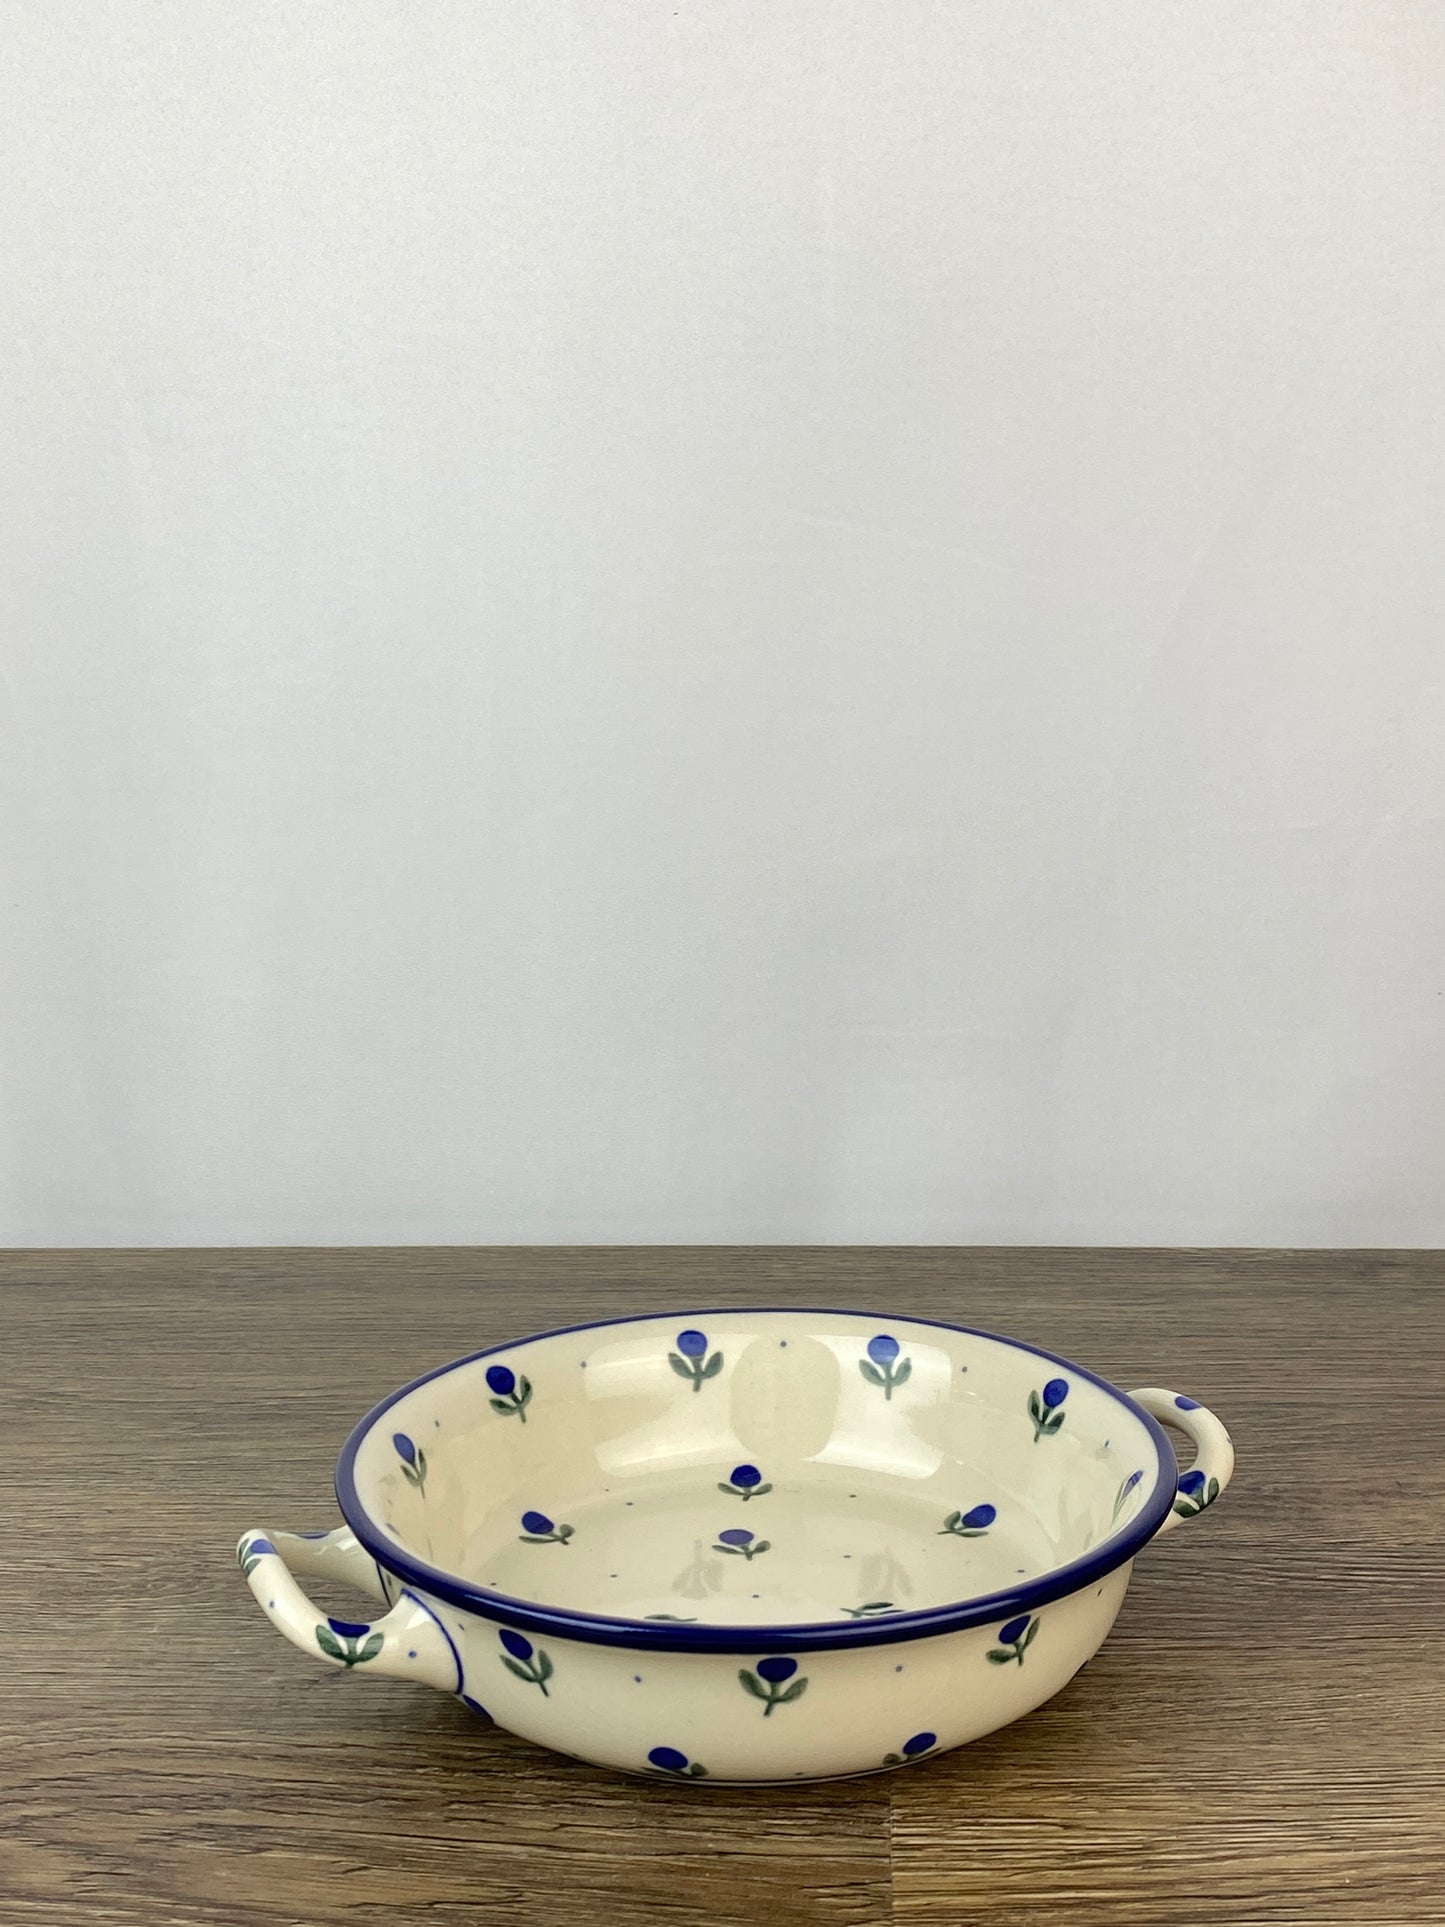 Small Round Baker with Handles - Shape C40 - Pattern 135